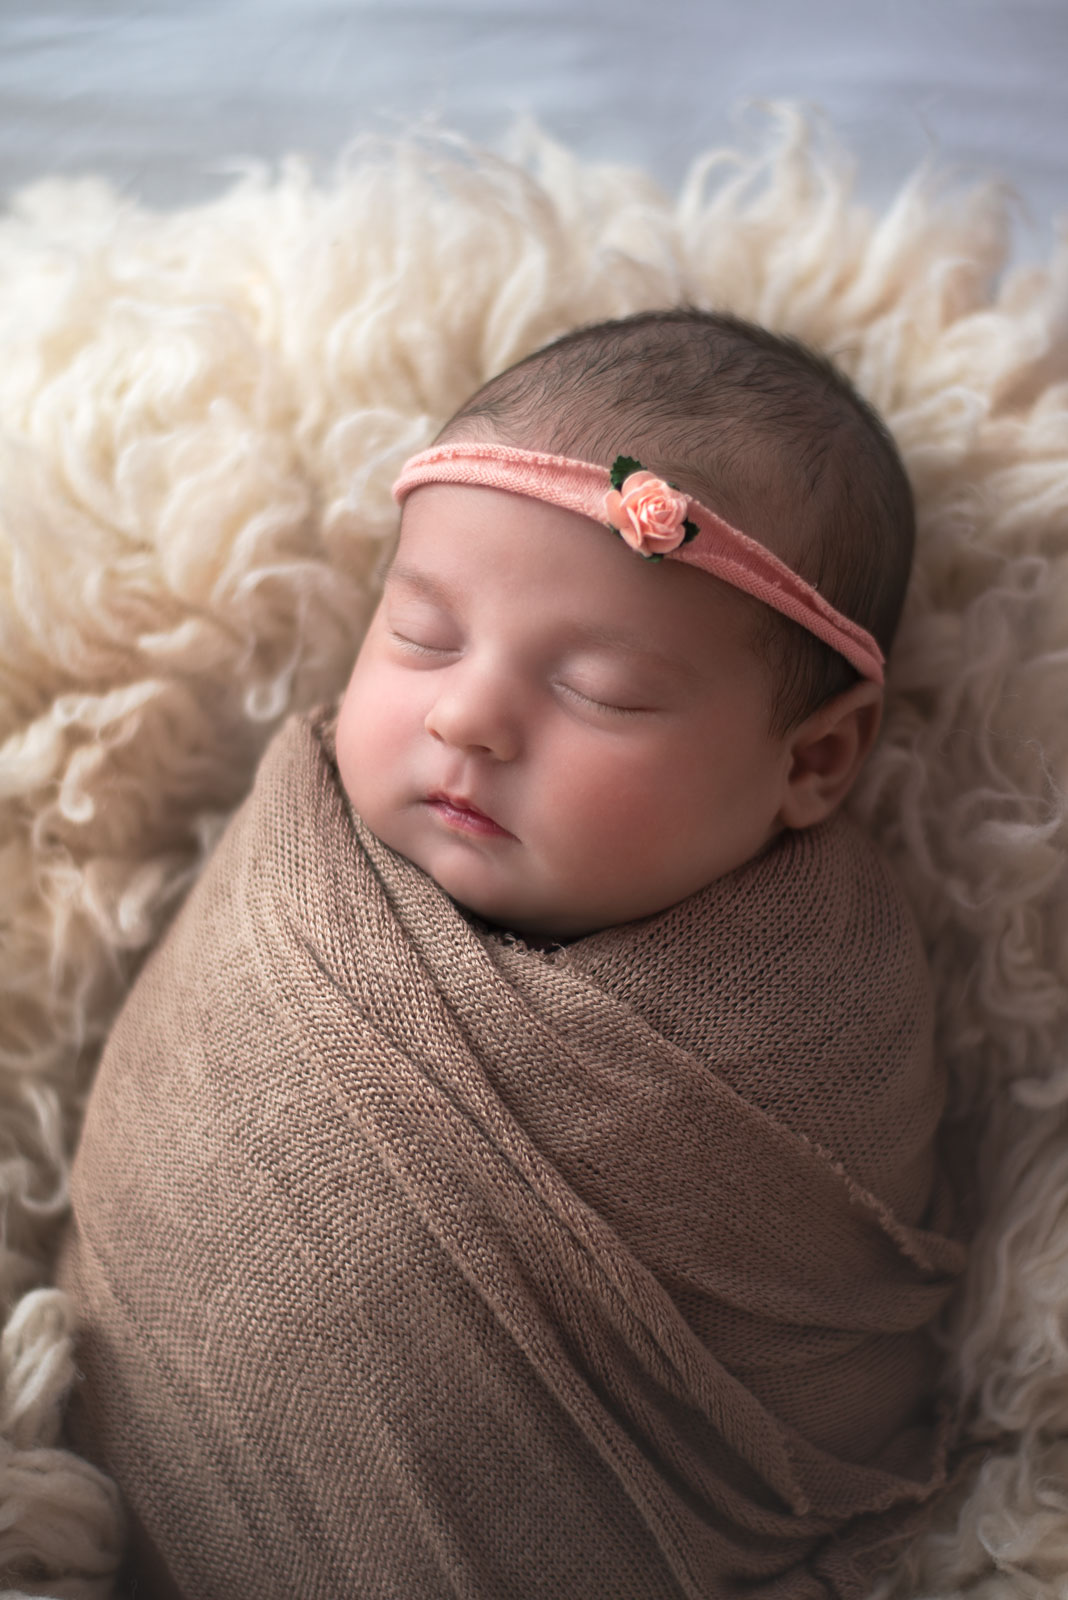 newborn baby girl wrapped in a tan blanket with a pink bow Washington University OBGYN